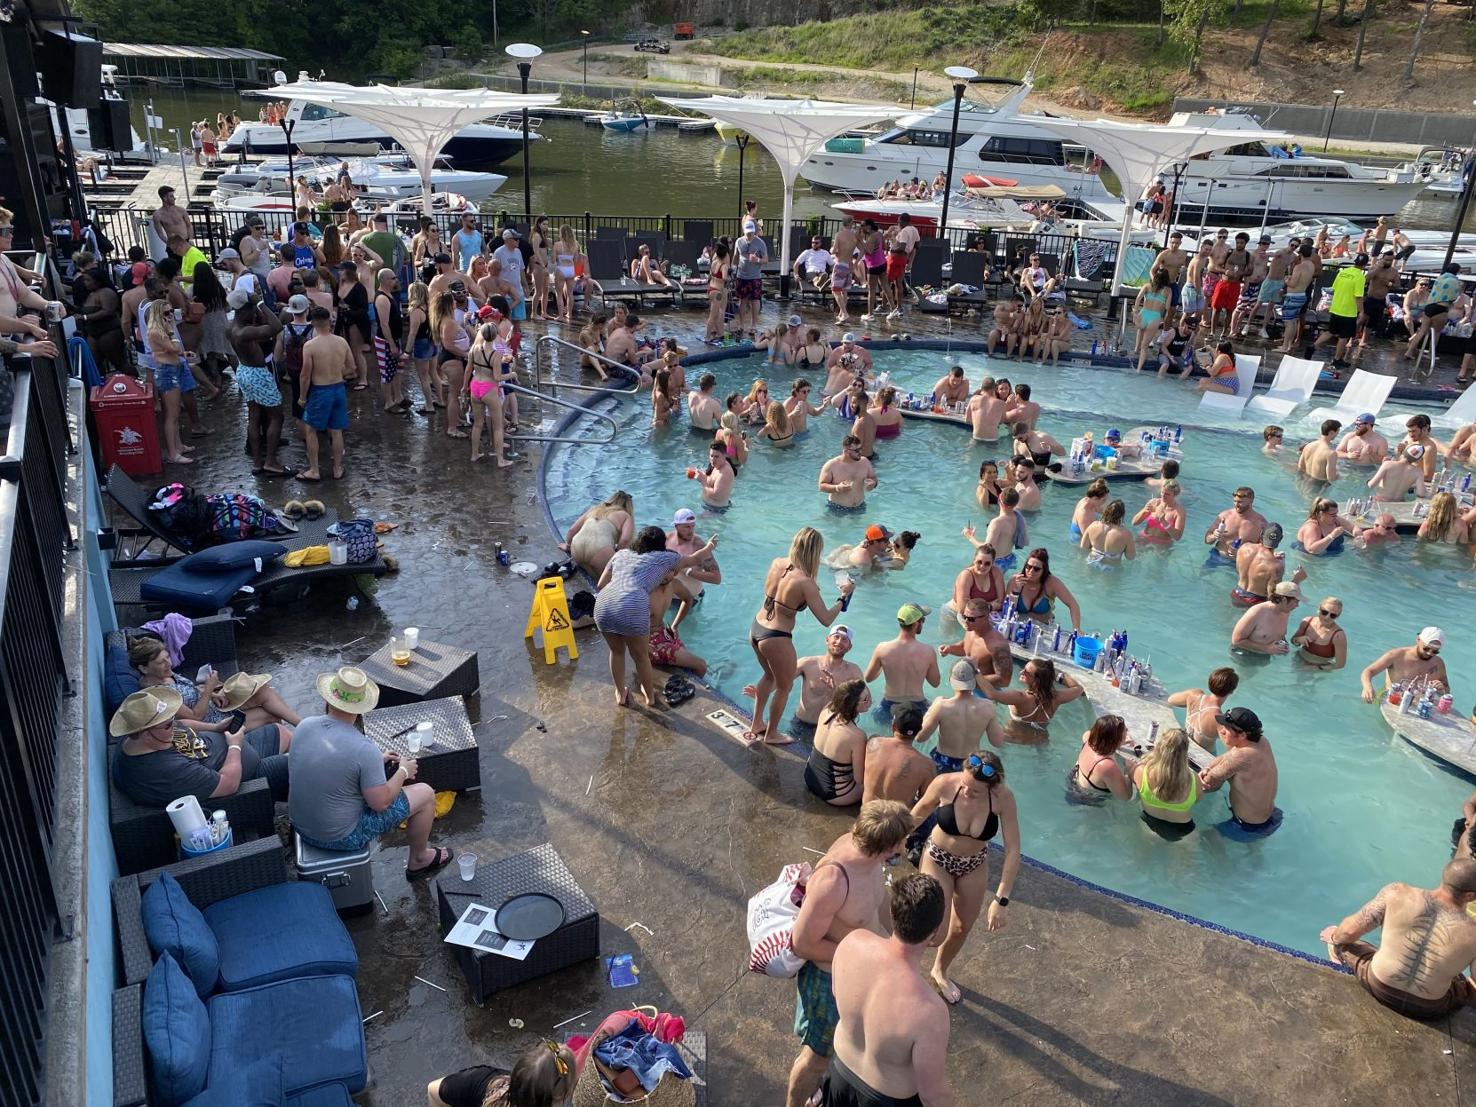 More photos Lack of social distancing at Lake of the Ozarks pool party